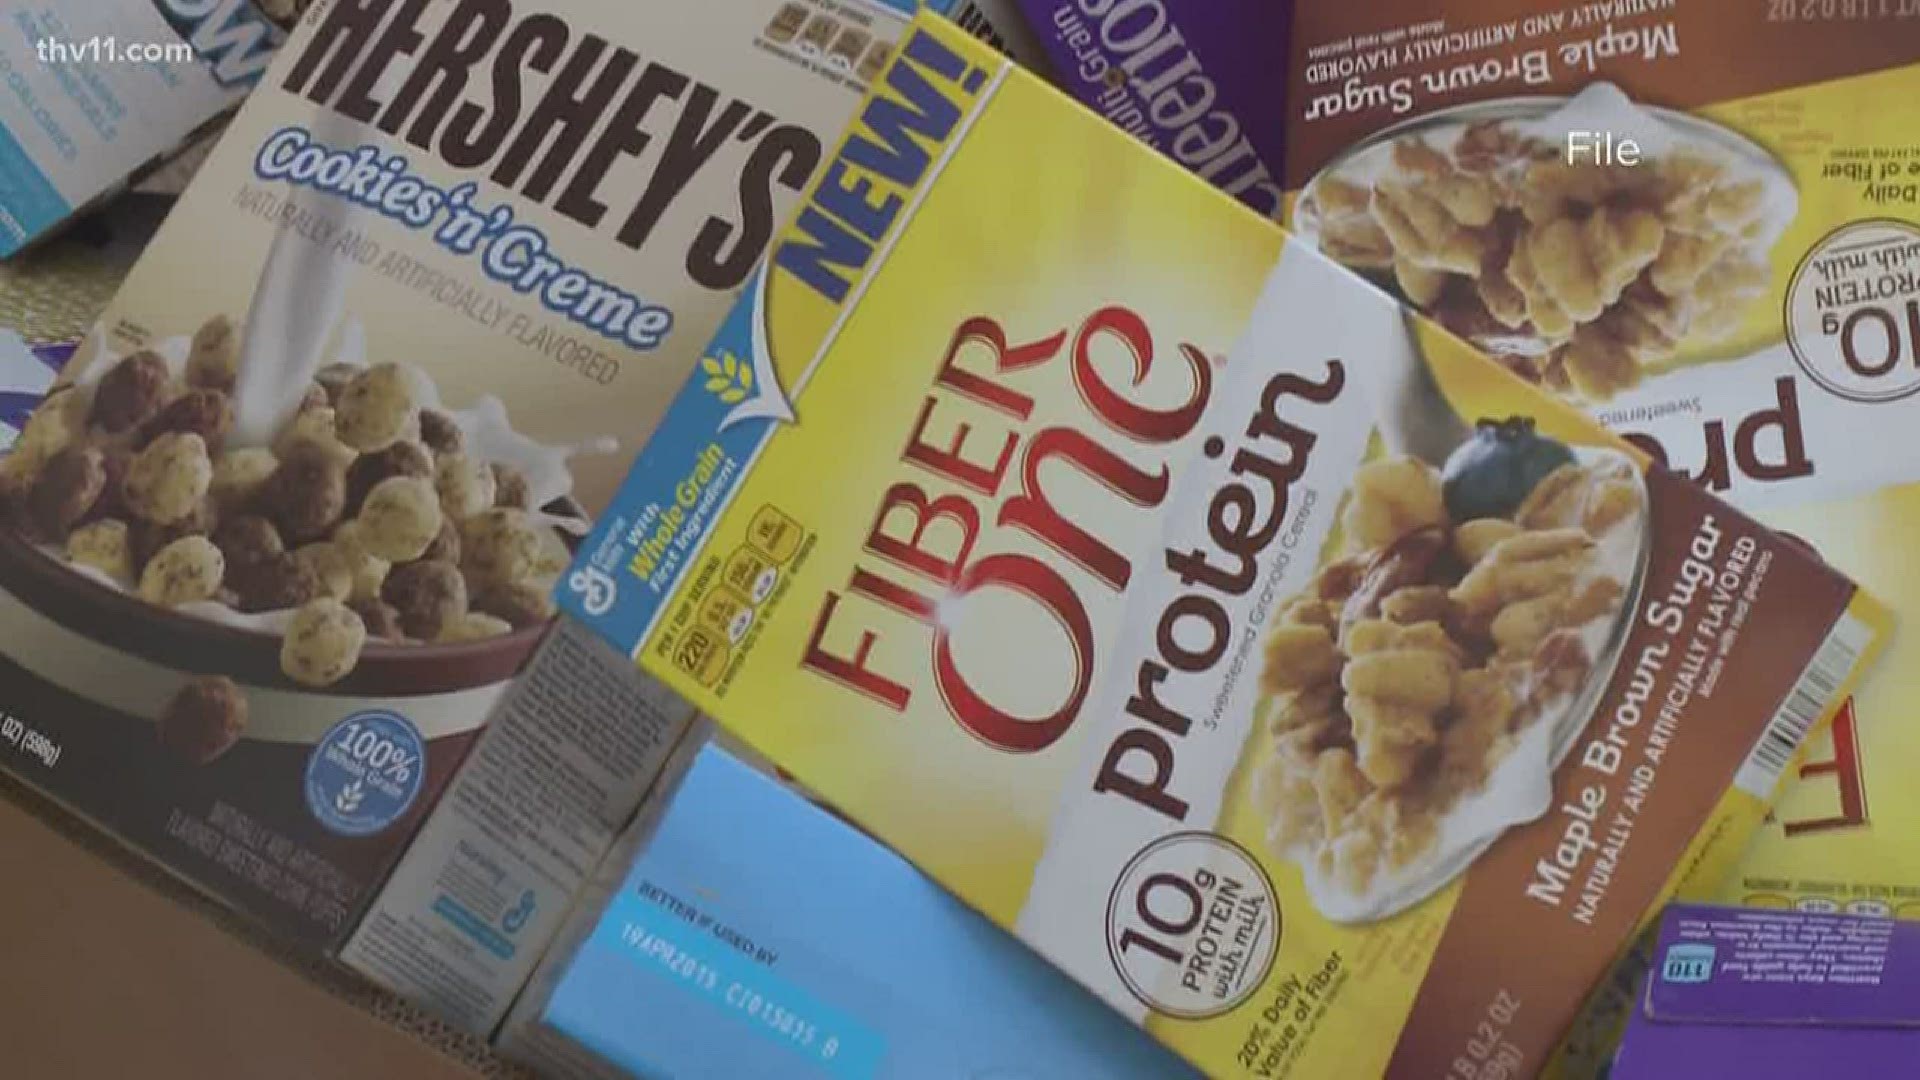 There's still time to start a team in the THV11 Summer Cereal Drive.